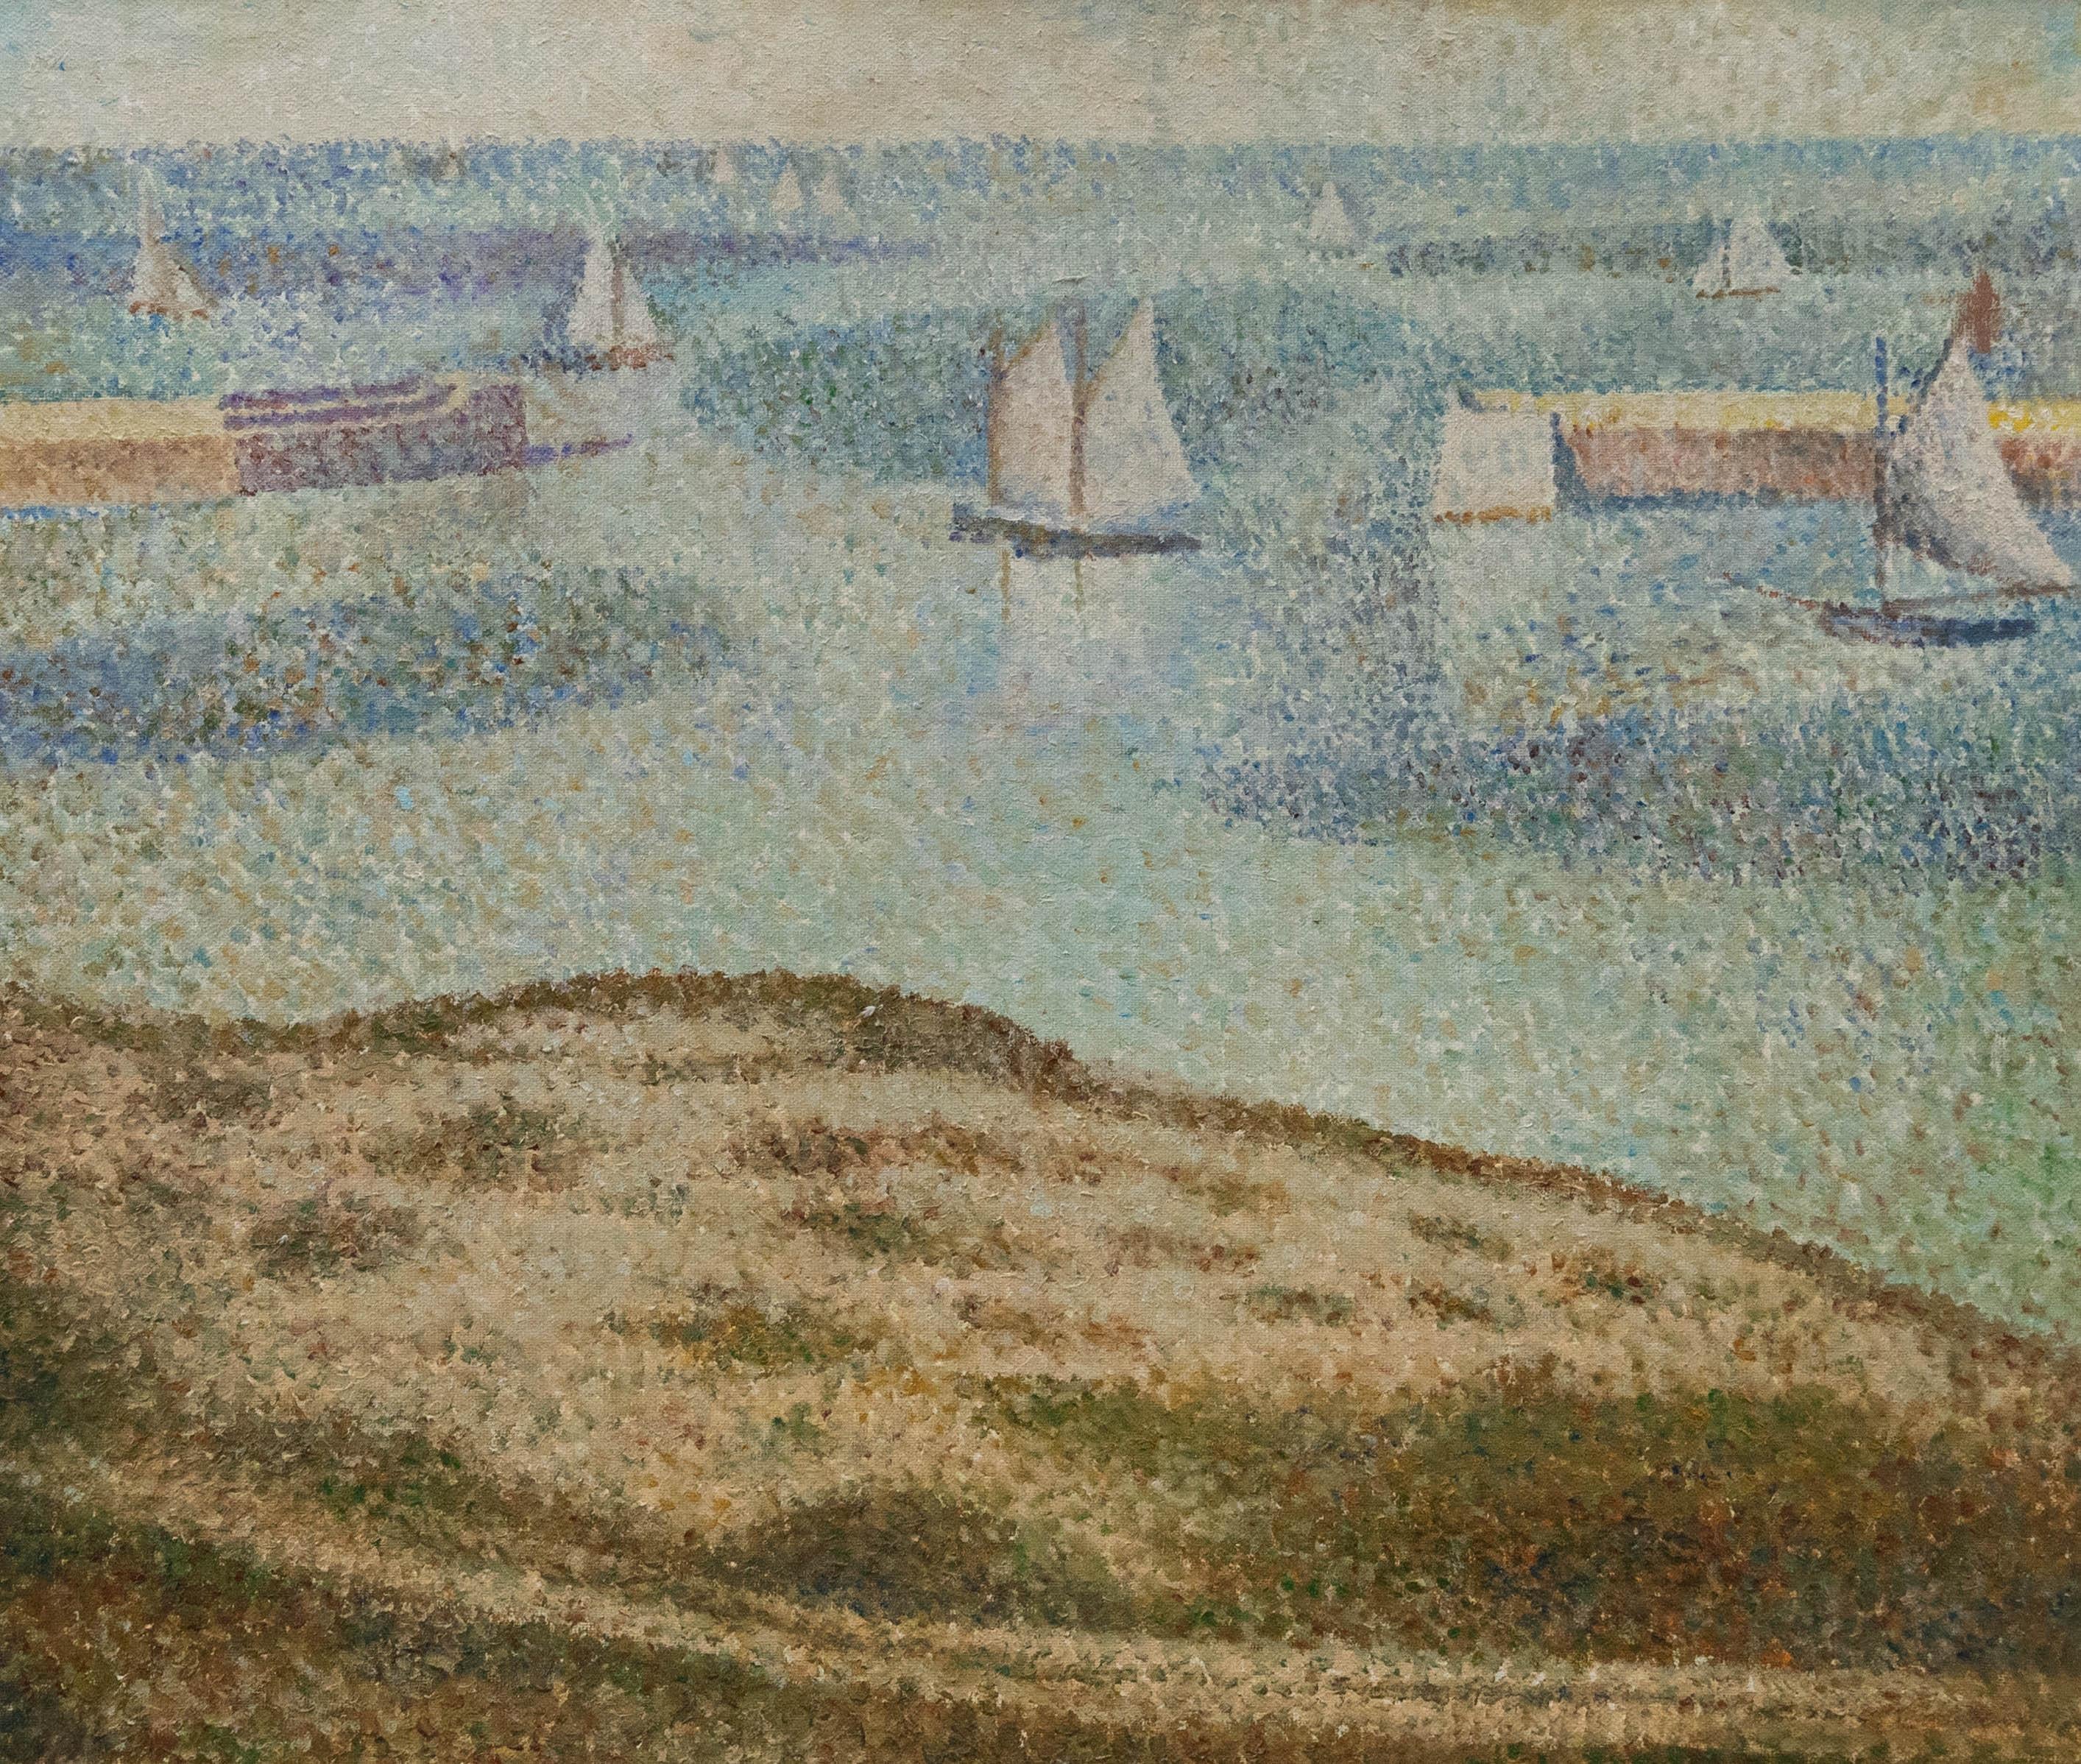 Unknown Figurative Painting - After Georges Seurat (1859-1891) - Contemporary Oil, Port-en-Bessin